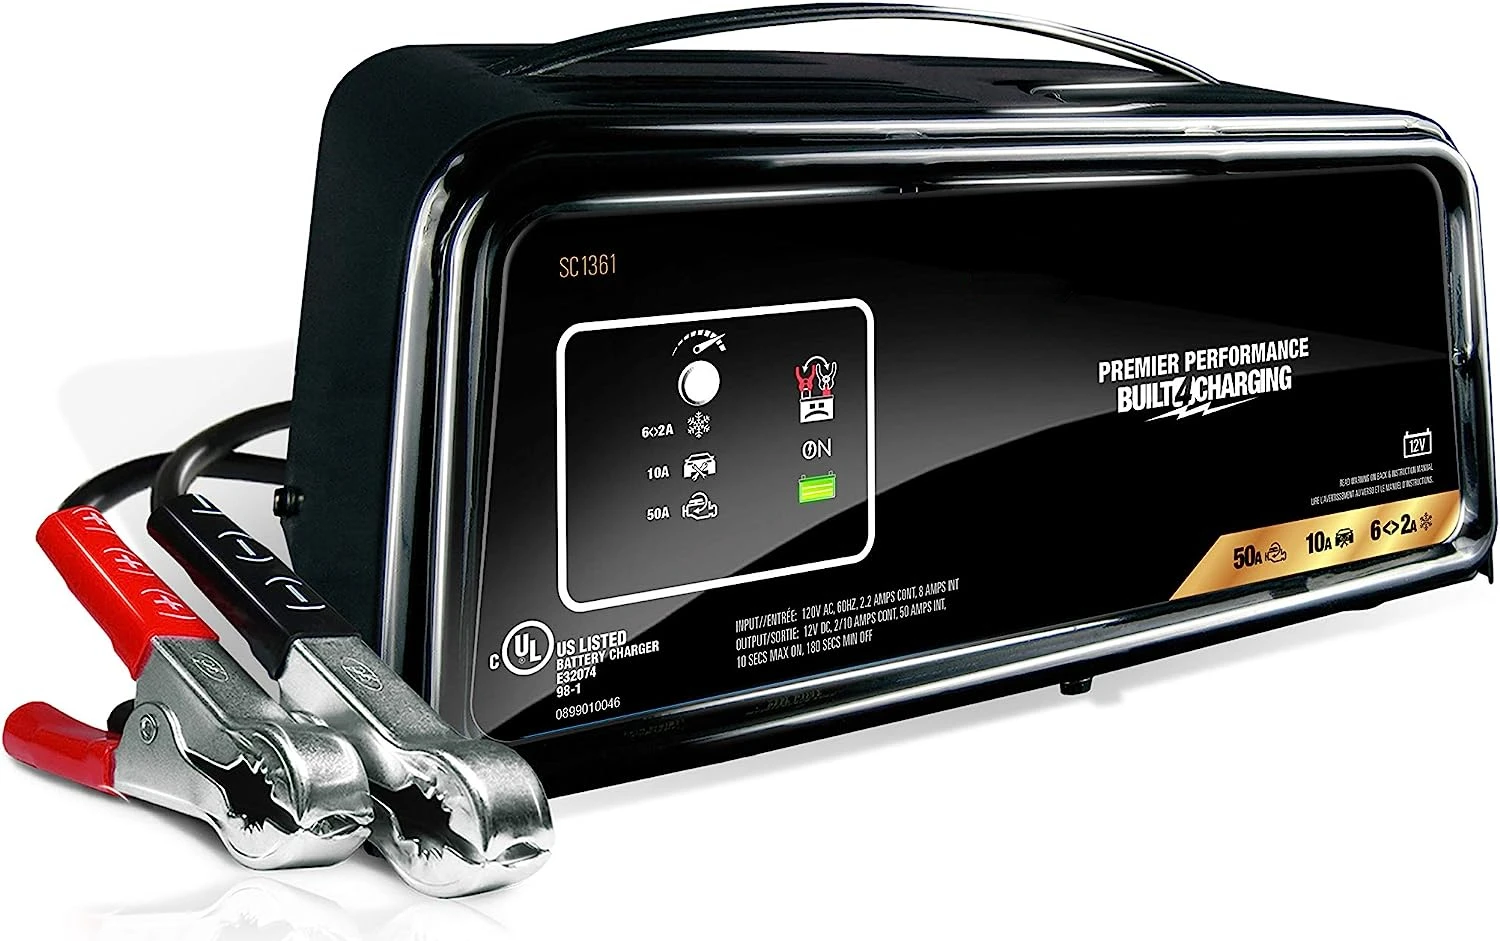 

SC1361 Fully Automatic Battery Charger, Maintainer, and Starter \u2013 50 Amp/10 Amp, 12V - Car, SUV, and Small Trucks